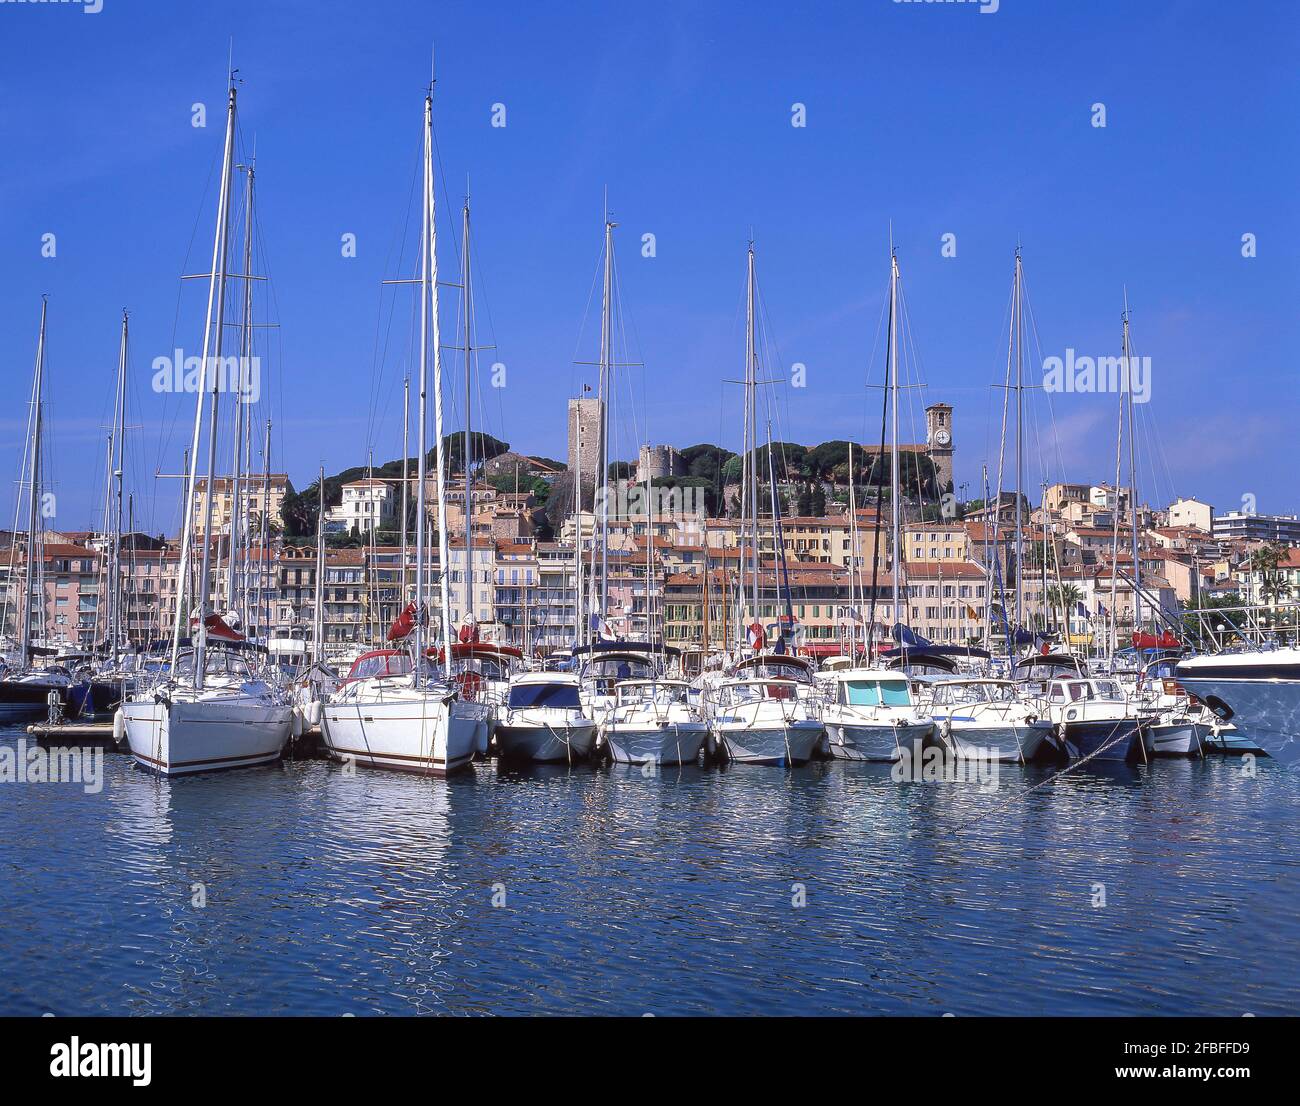 Traditional fishing boats in Old Harbour, Cannes, Côte d'Azur, Alpes-Maritimes, Provence-Alpes-Côte d'Azur, France Stock Photo